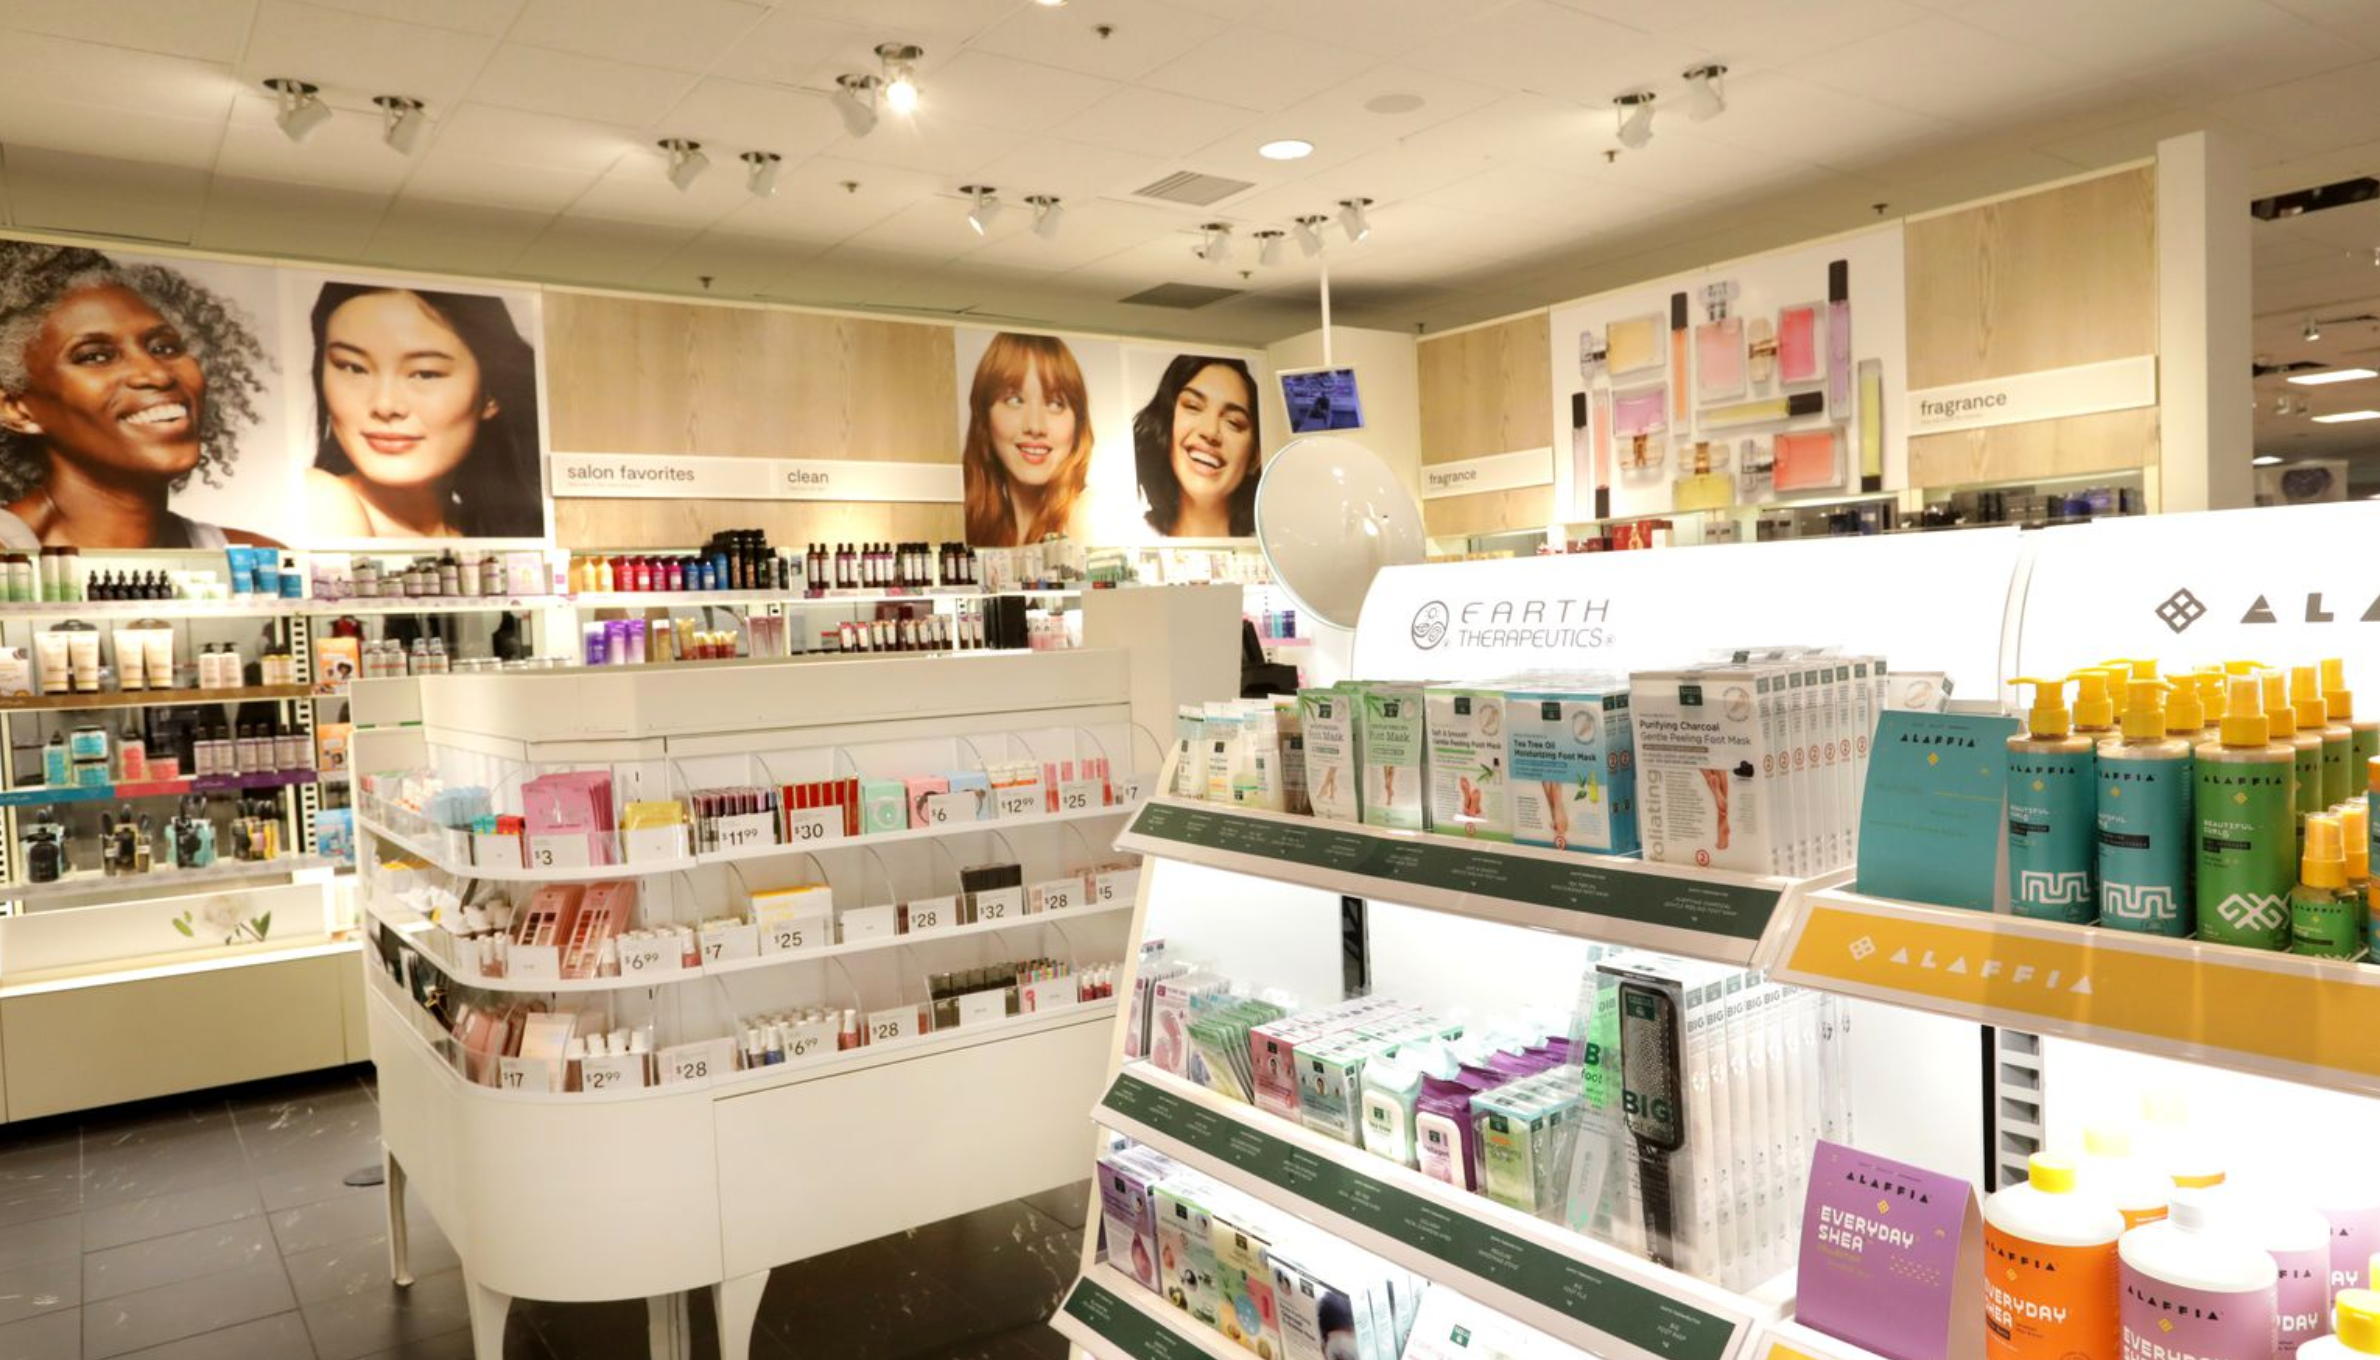 The brands that you'll find at the new JCPenney Beauty concept will surprise you